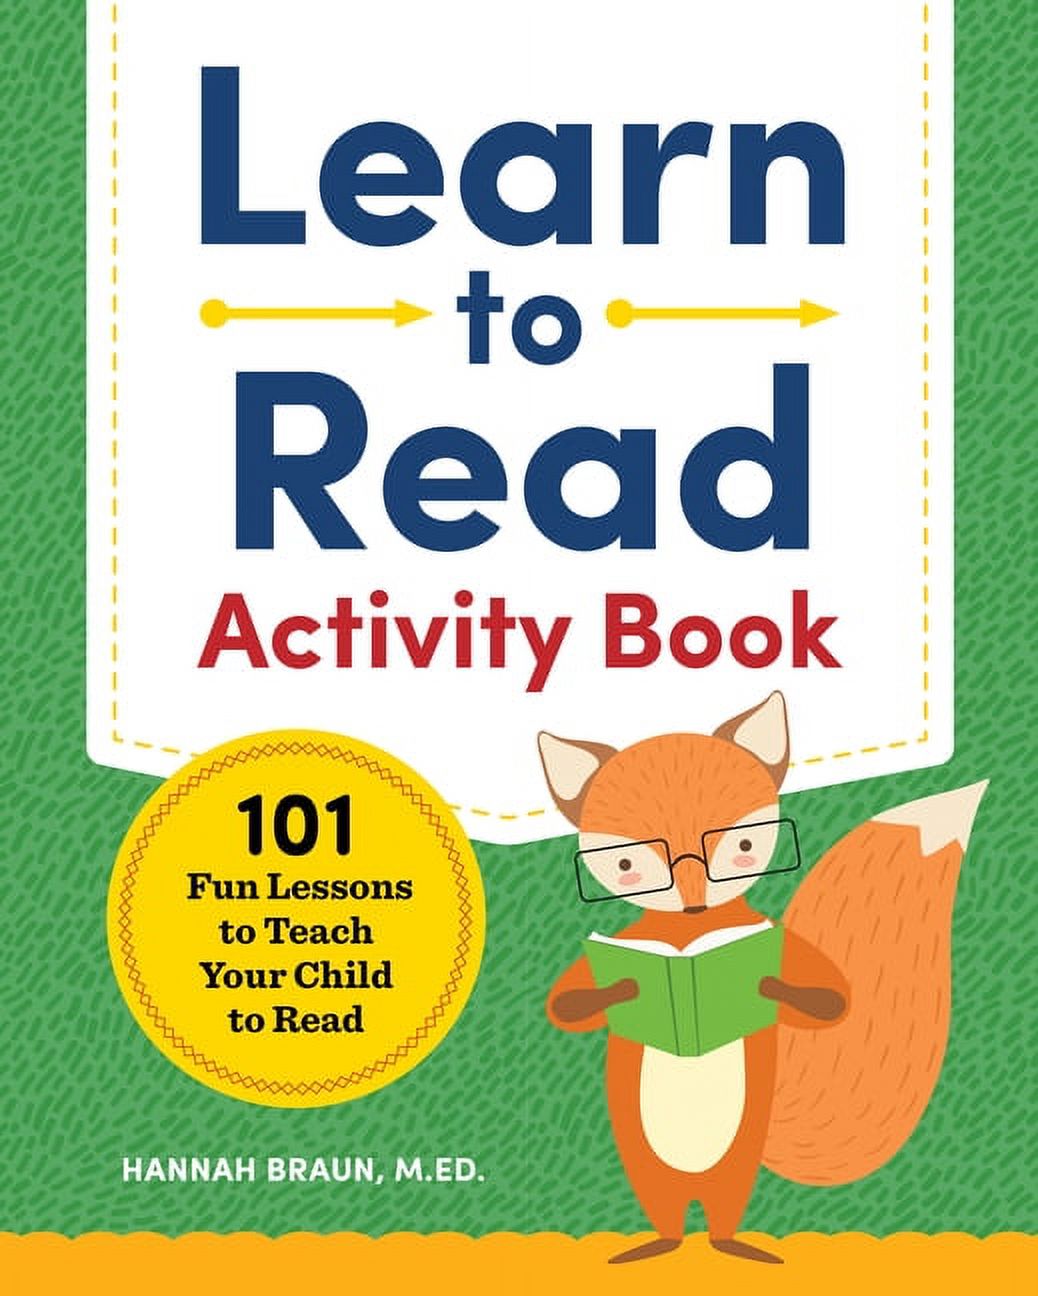 Book　101　Activity　Lessons　Read　to　to　Learn　Your　Child　(Paperback)　to　Fun　Read　Teach